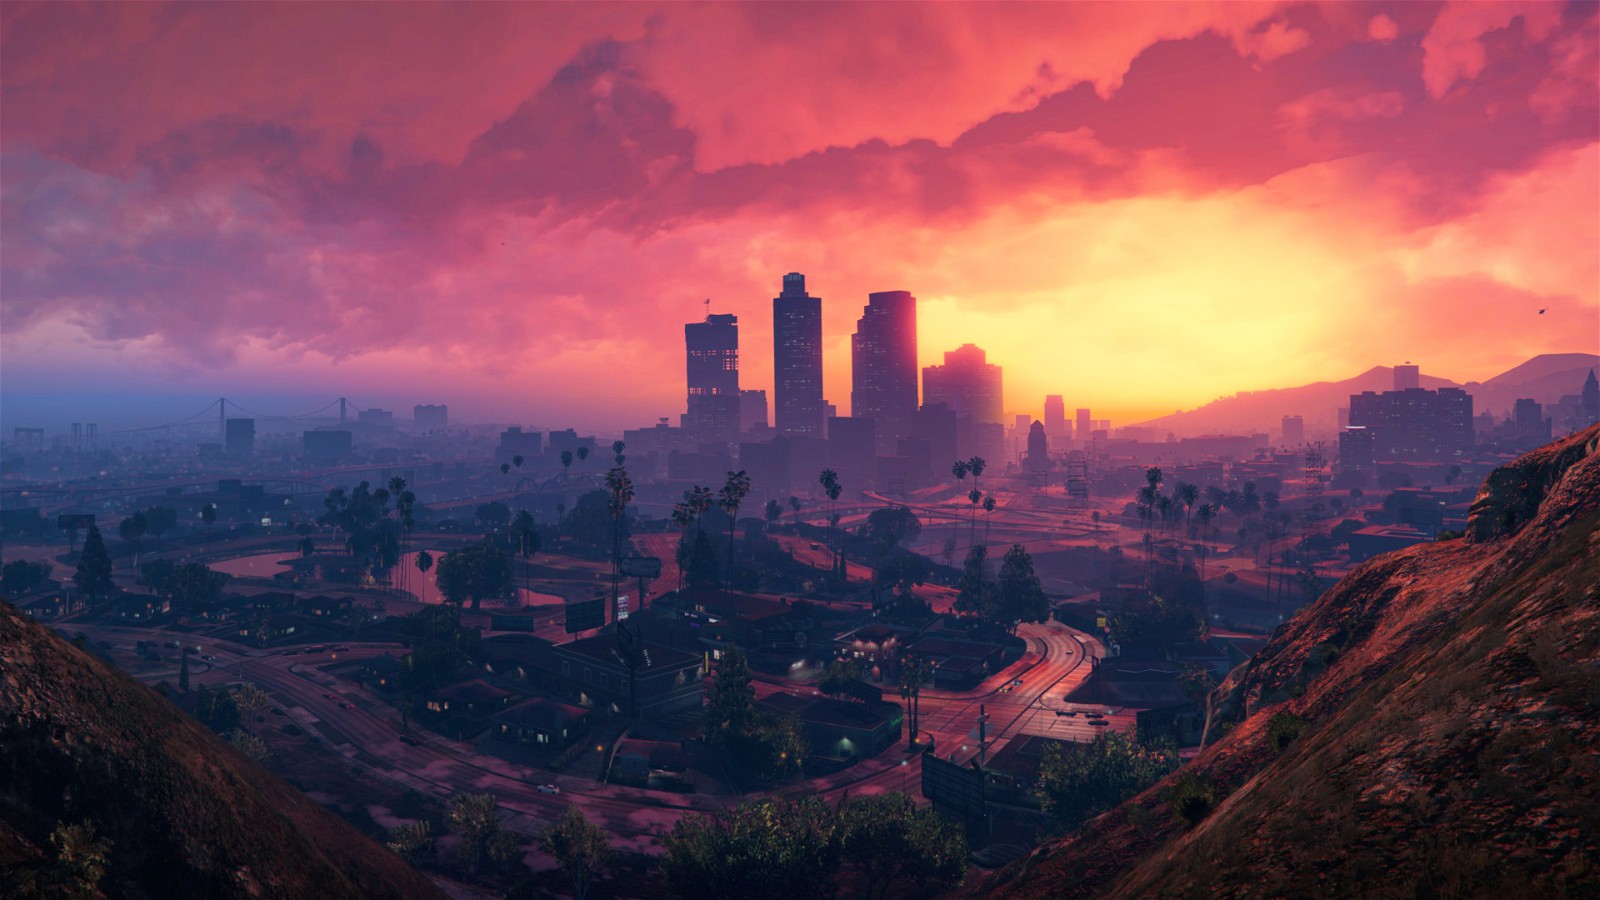 I love what I saw in the leaks: Not $150 But Gaming Fans Agree to Pay Good  Money For GTA 6 After Recent Leaks - FandomWire